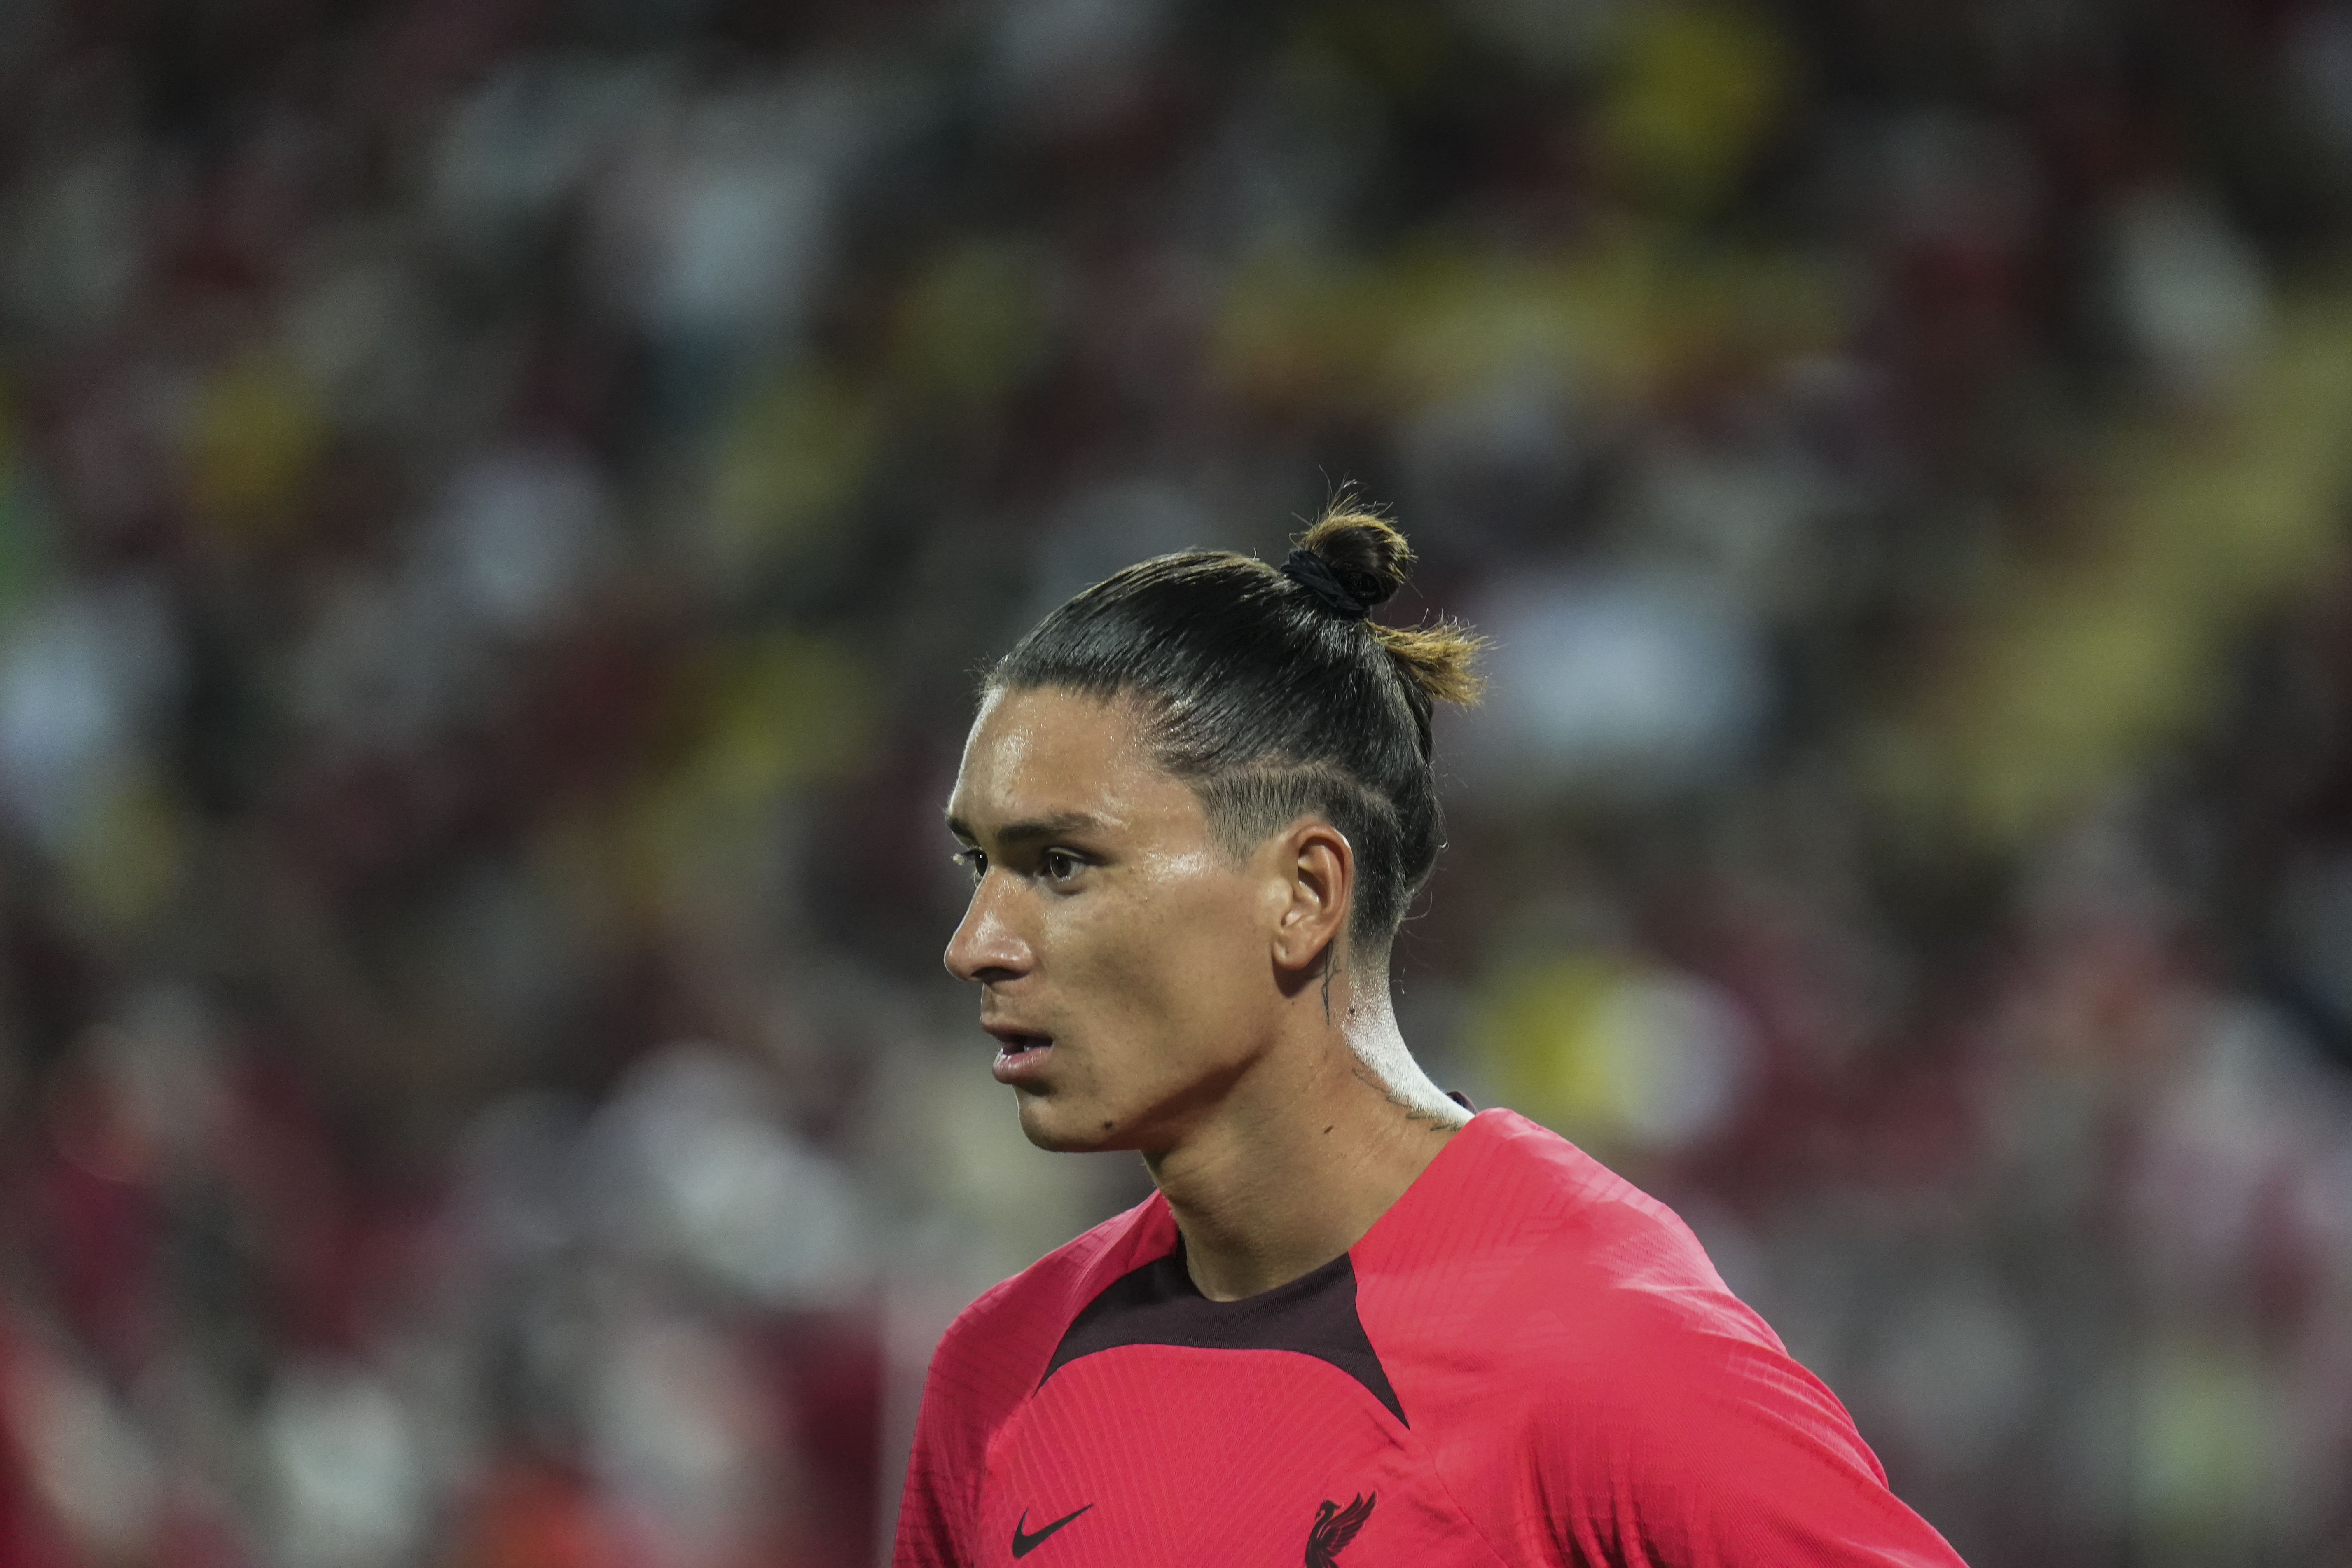 Liverpool’s newly signed player, forward Darwin Núñez warm up with their teammates during their training session at Rajamangala National Stadium in Bangkok, Thailand, 11 July 2022.